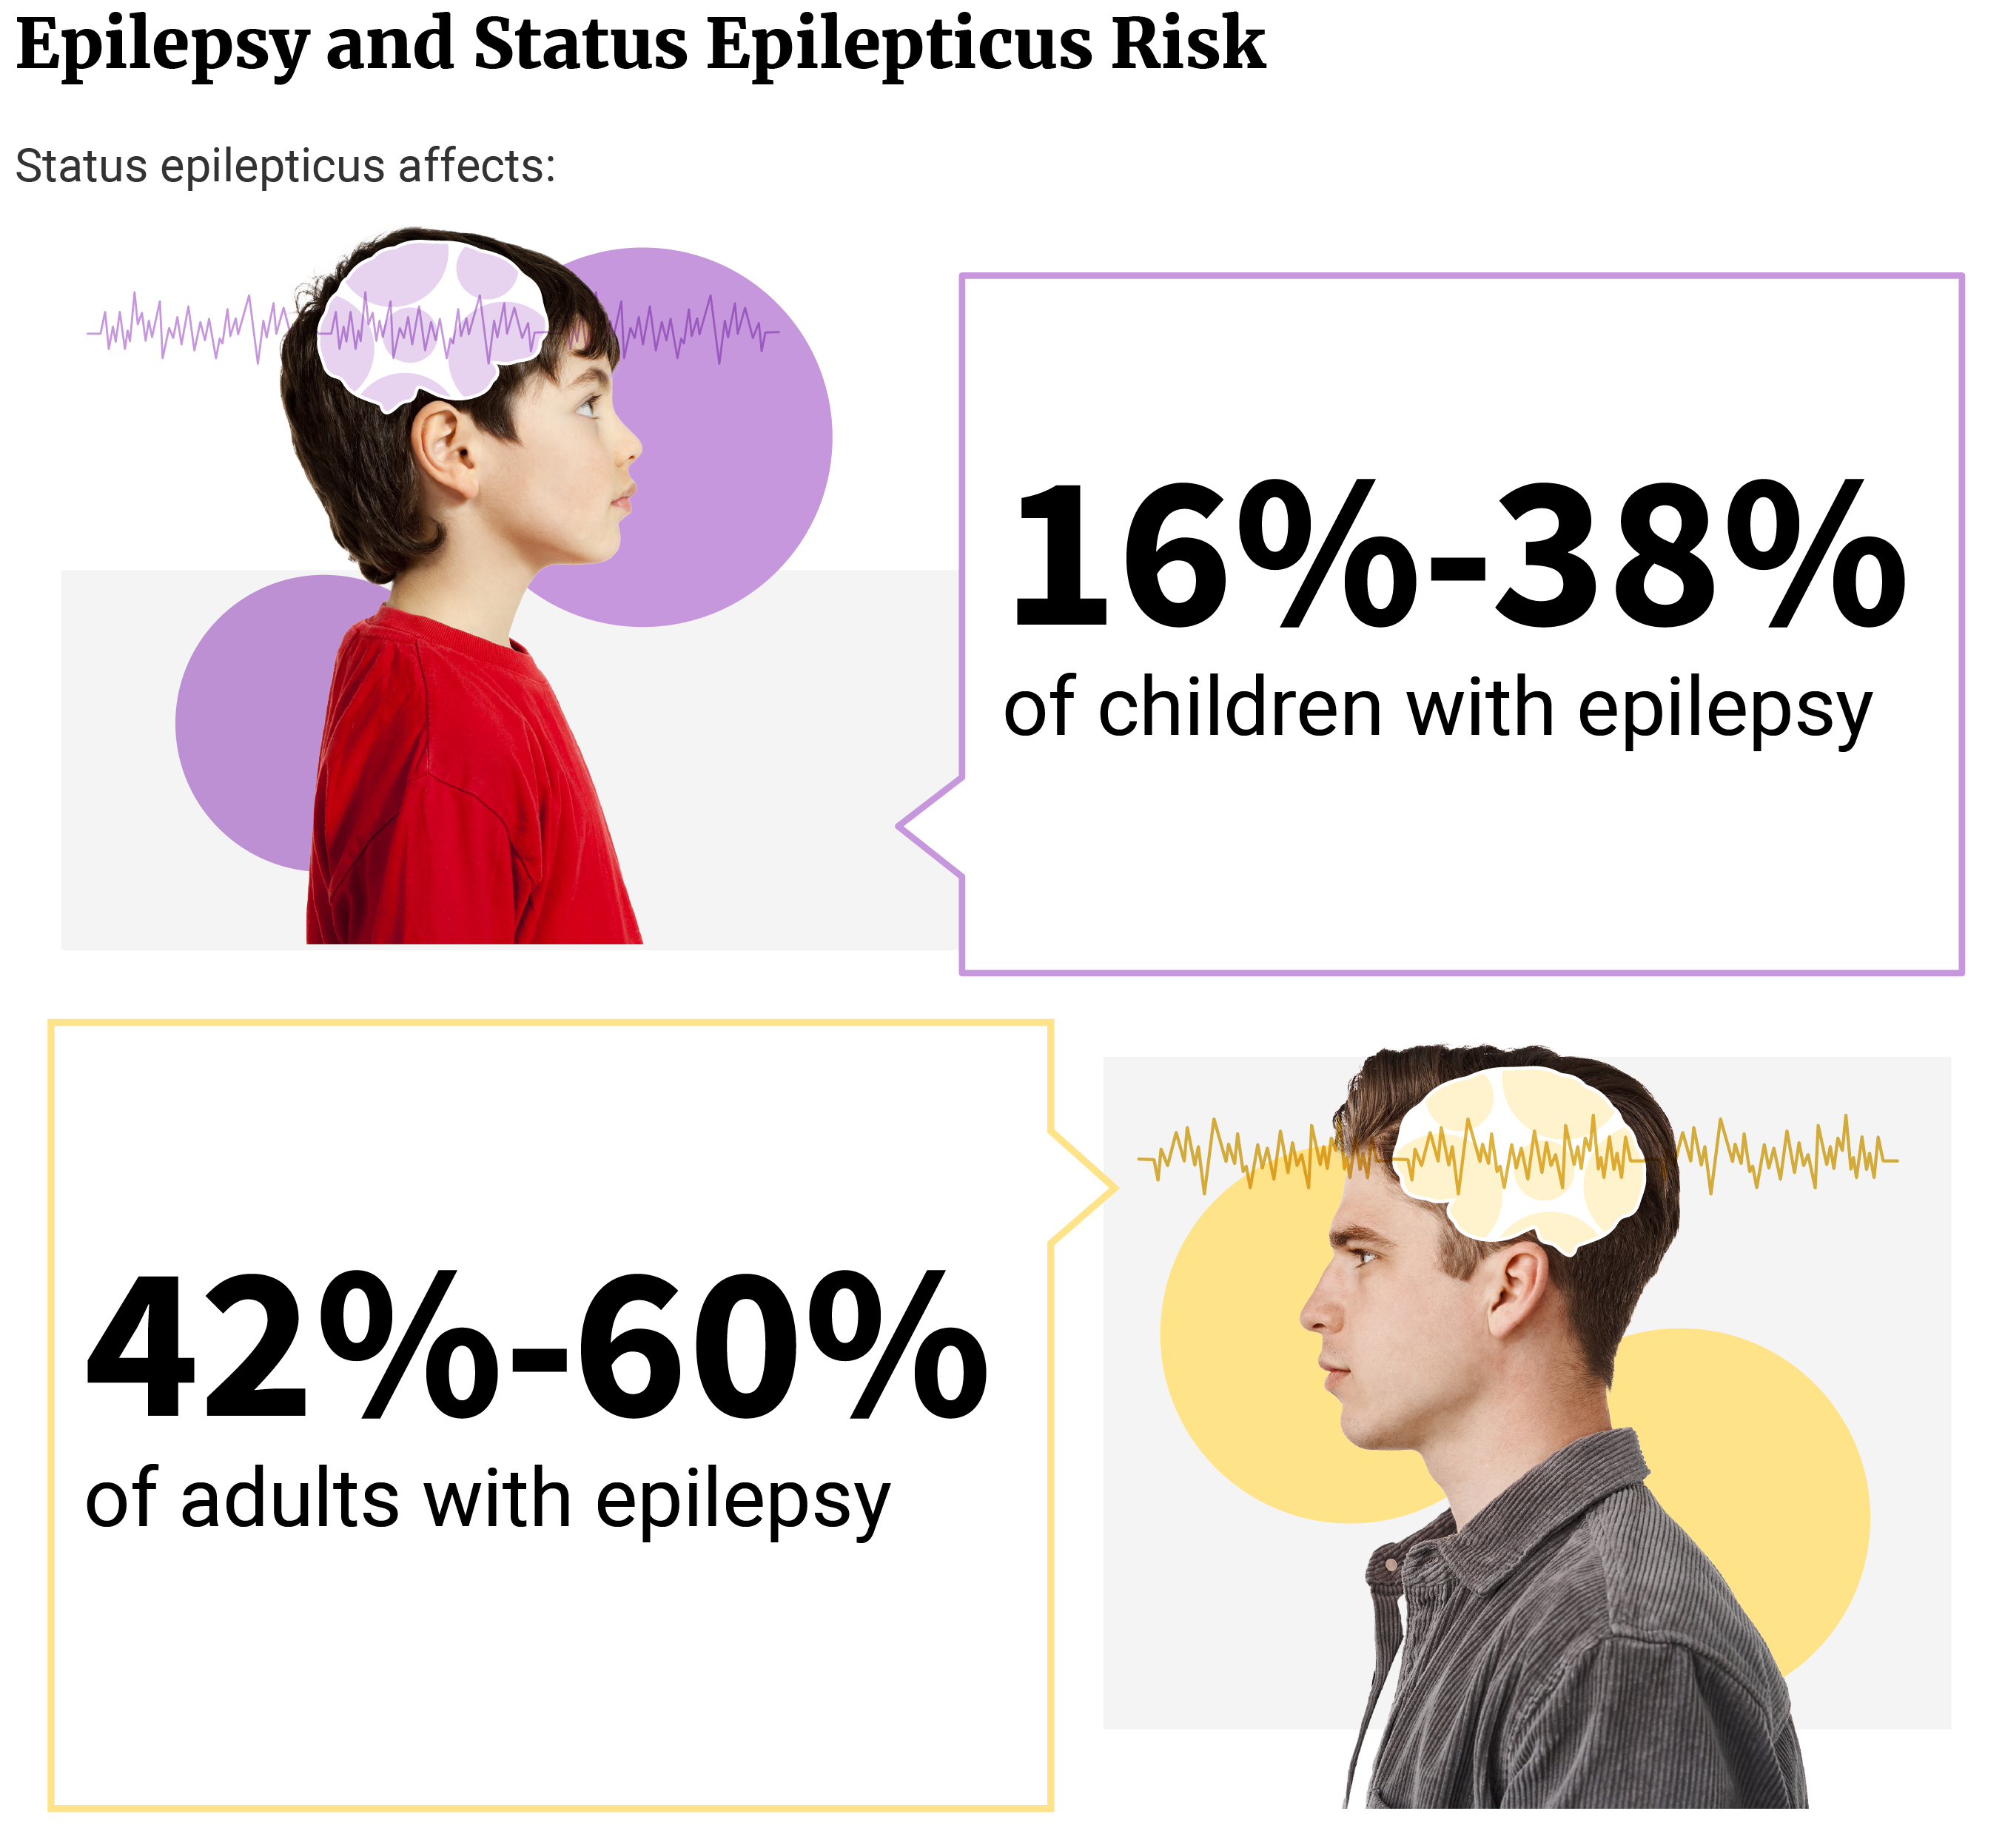 Call out text box showing the percentage of adults and children with epilepsy affected by status epilepticus.